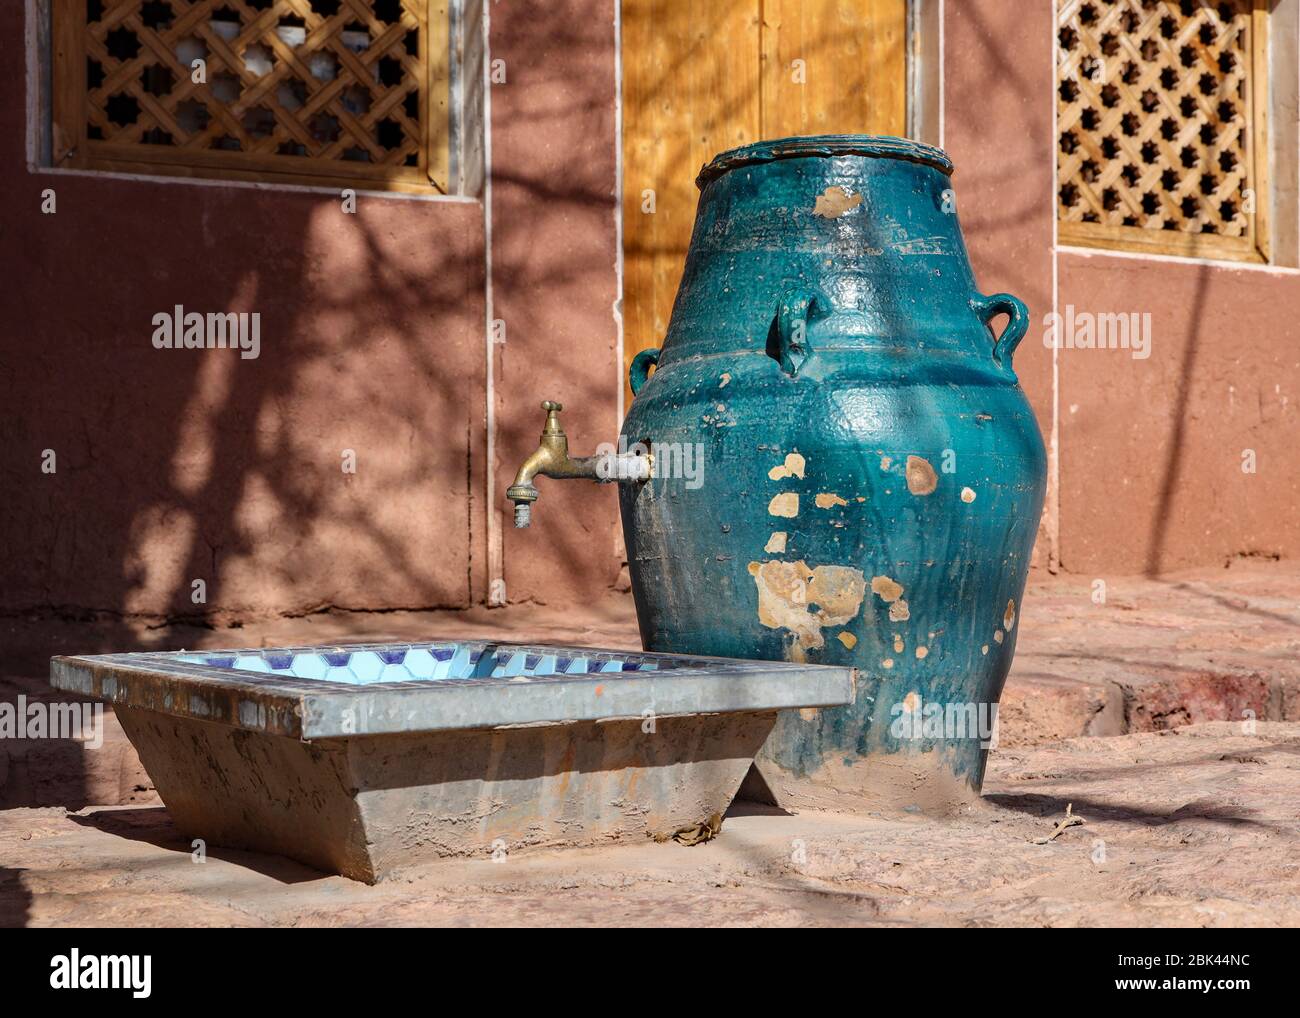 A clay pot water faucet in the village of Abyaneh, Iran,Esfahan Province, Iran,Persia, Middle East Stock Photo